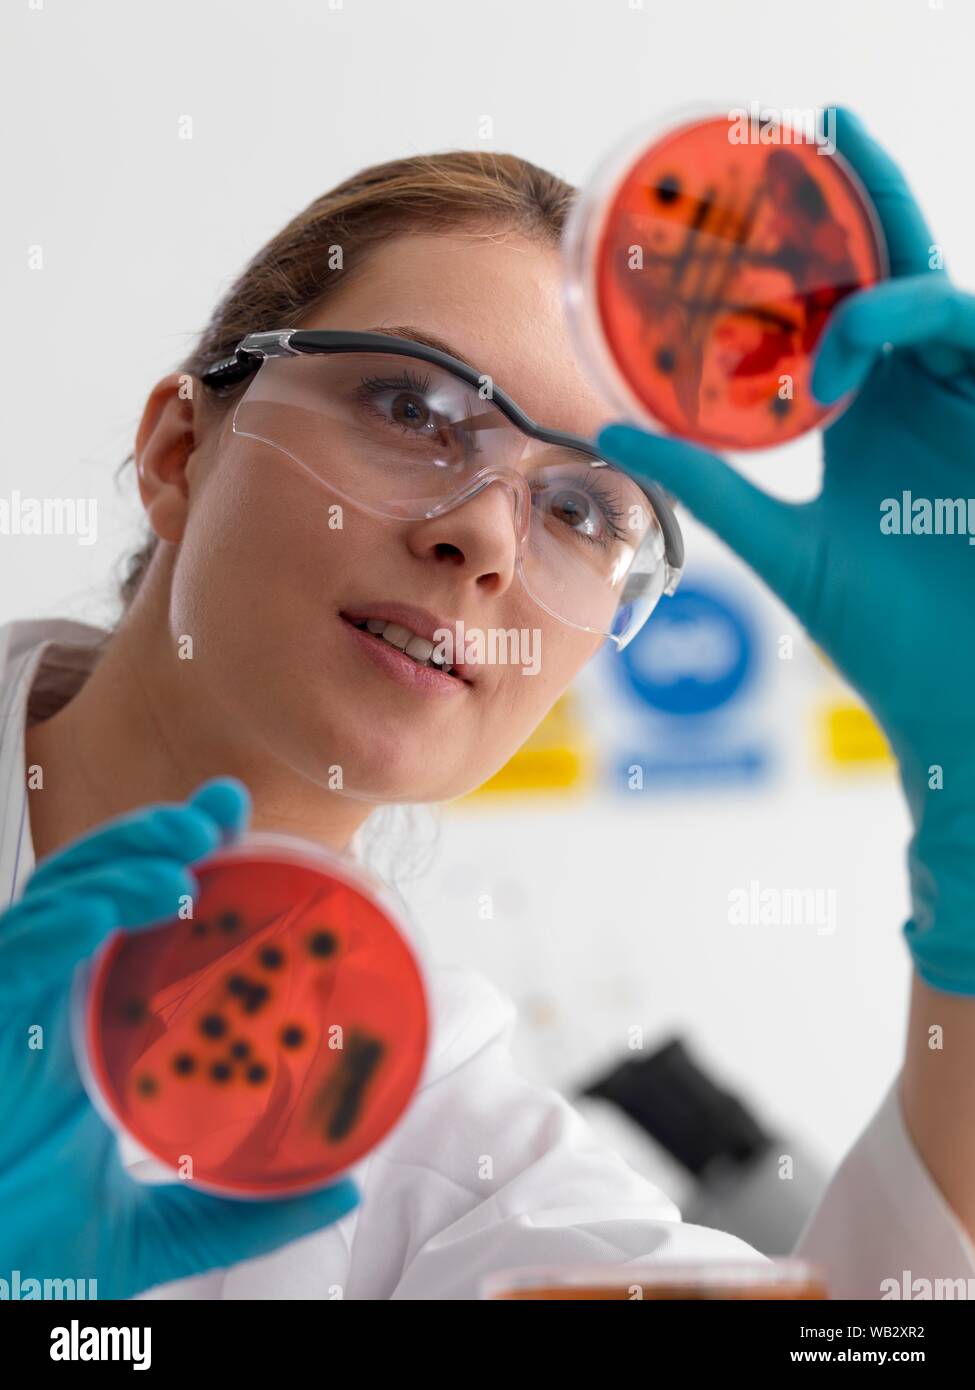 Microbiology research. Scientist viewing cultures growing in petri dishes. Stock Photo